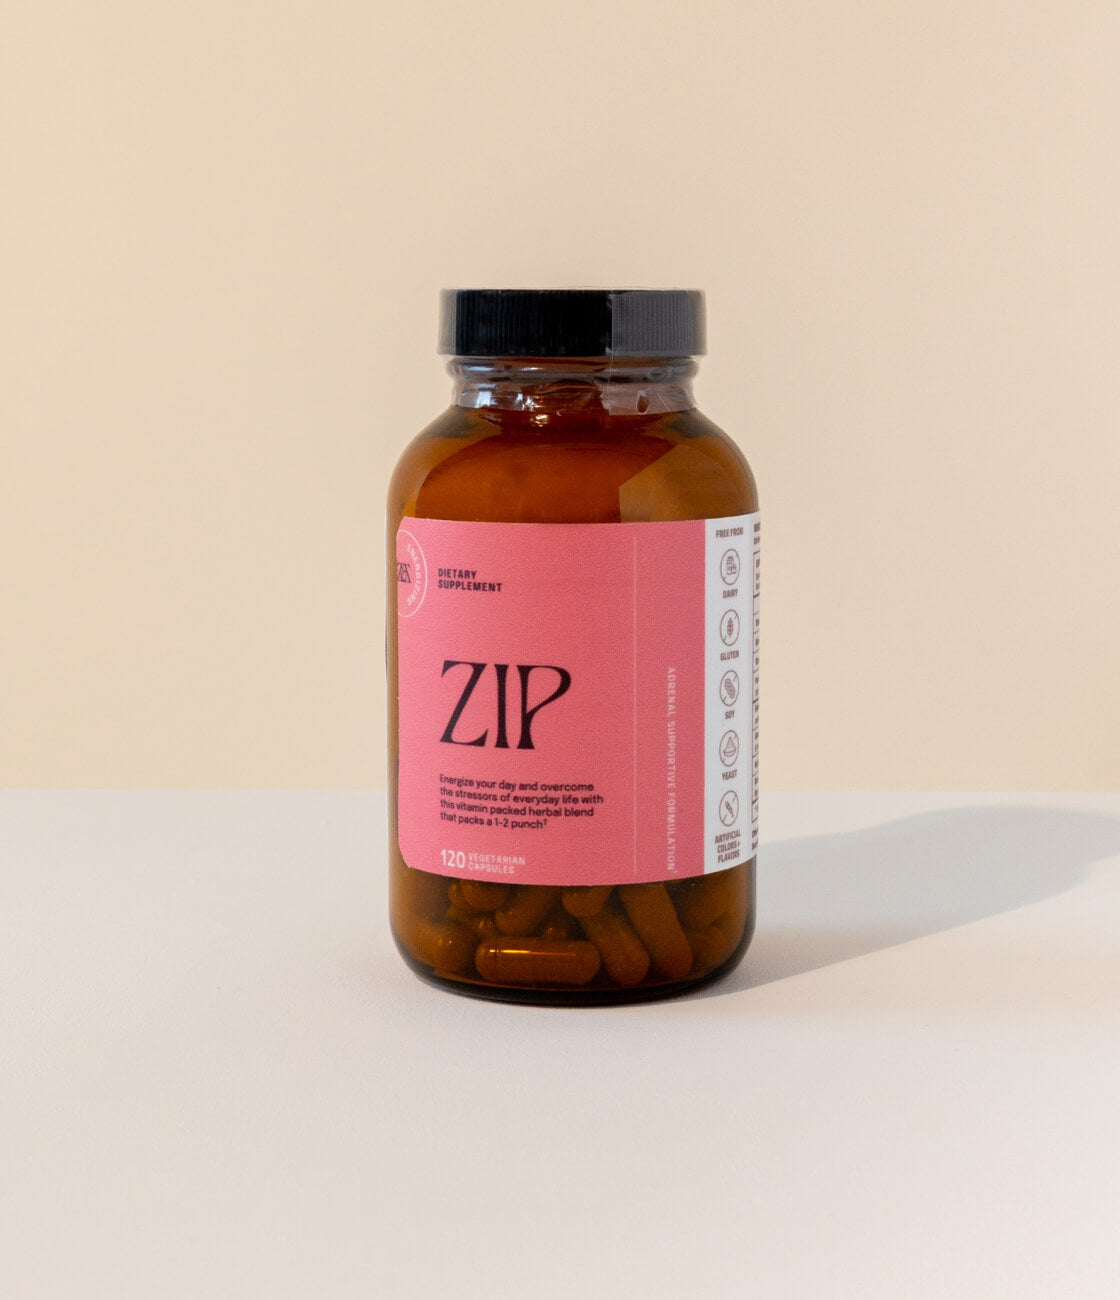 Energize your day and overcome stressors of everyday life with this vitamin packed herbal blend that packs a 1–2 punch. [AD: A 120 capsule bottle of Zip with a pink label sits on a plain yellow and cream backdrop]